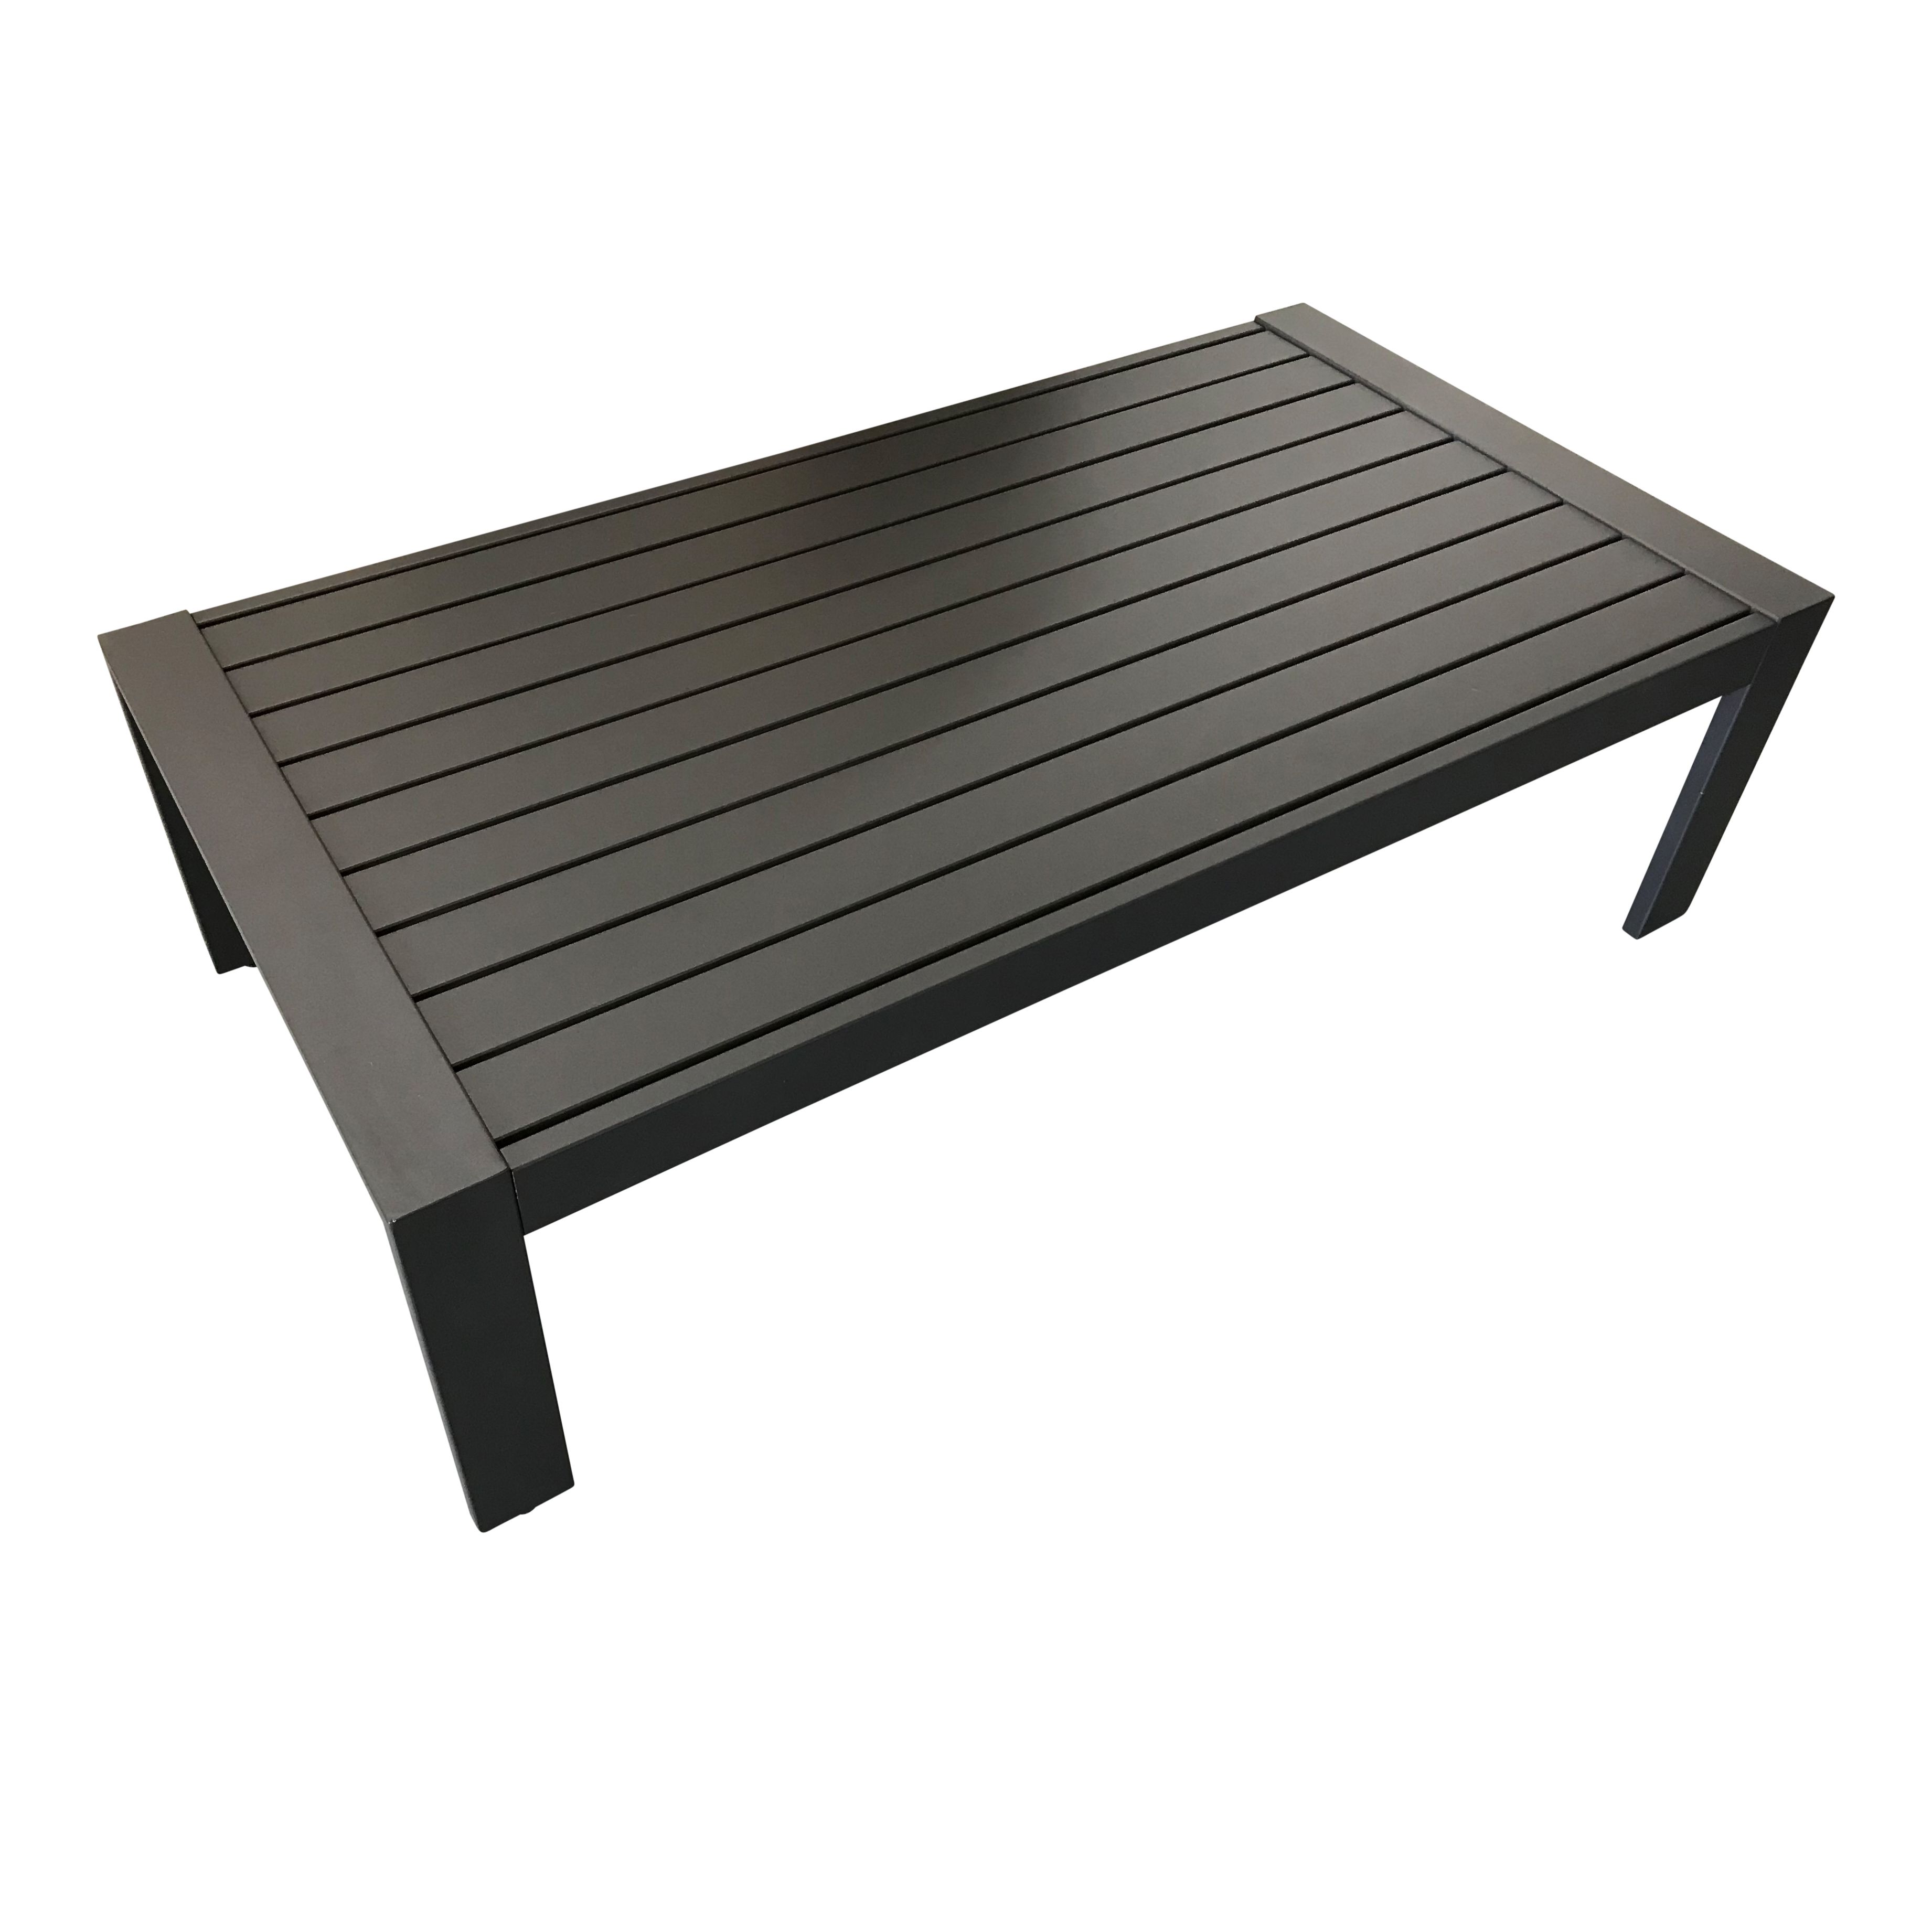 Popular Colada Coffee Table – Gunmetal – Inspired Outdoor Living Throughout Gunmetal Coffee Tables (View 13 of 20)